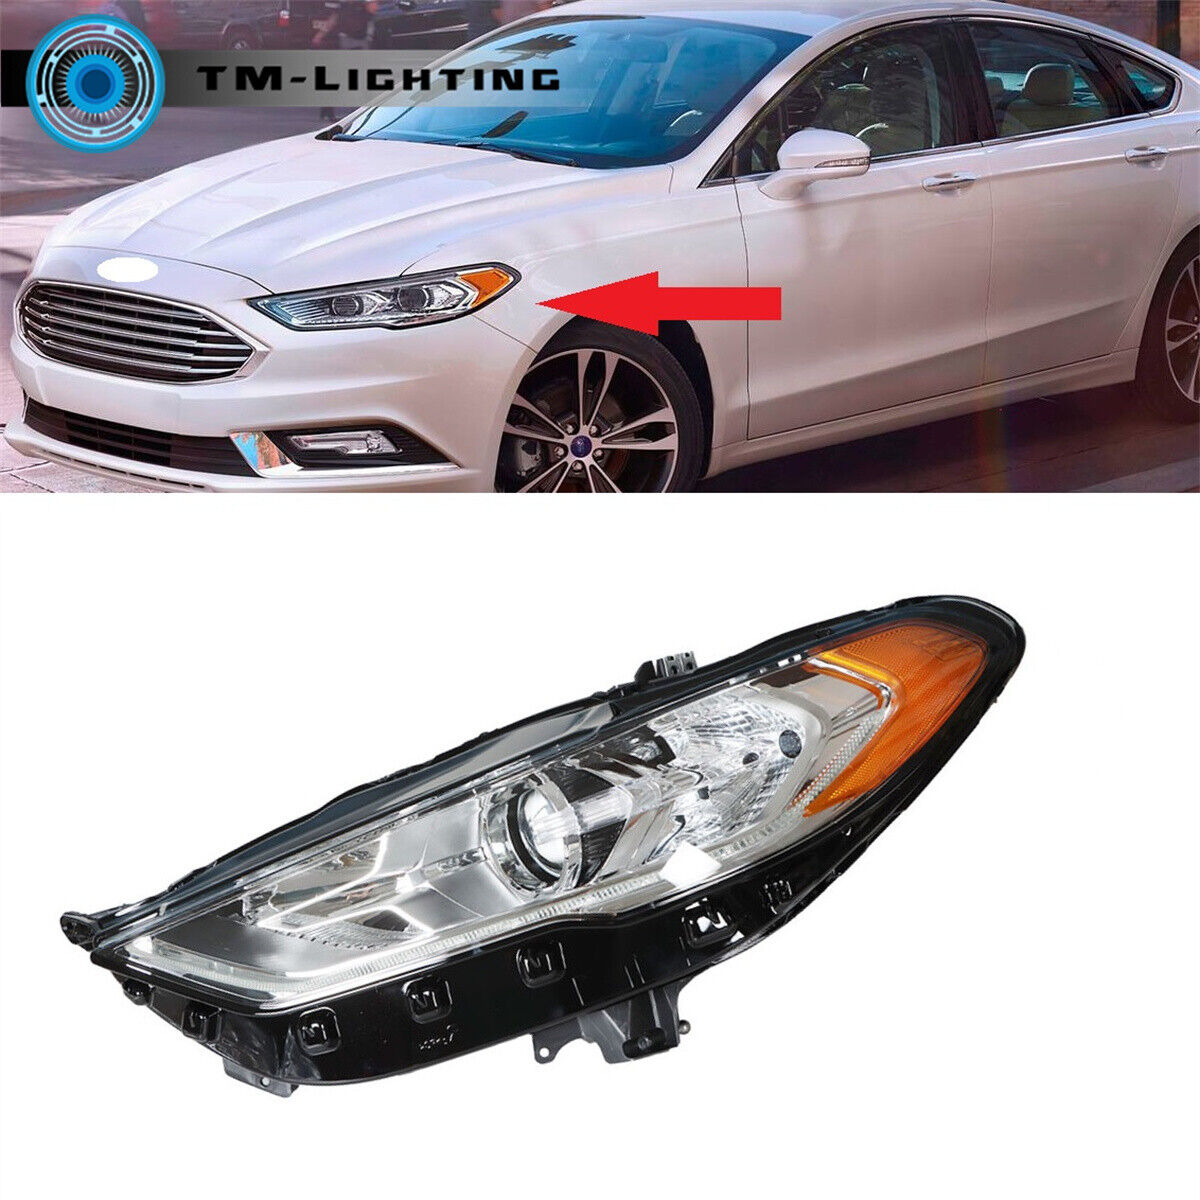 Driver Left Side Headlight Headlamp For 2017-2019 Ford Fusion Replacement